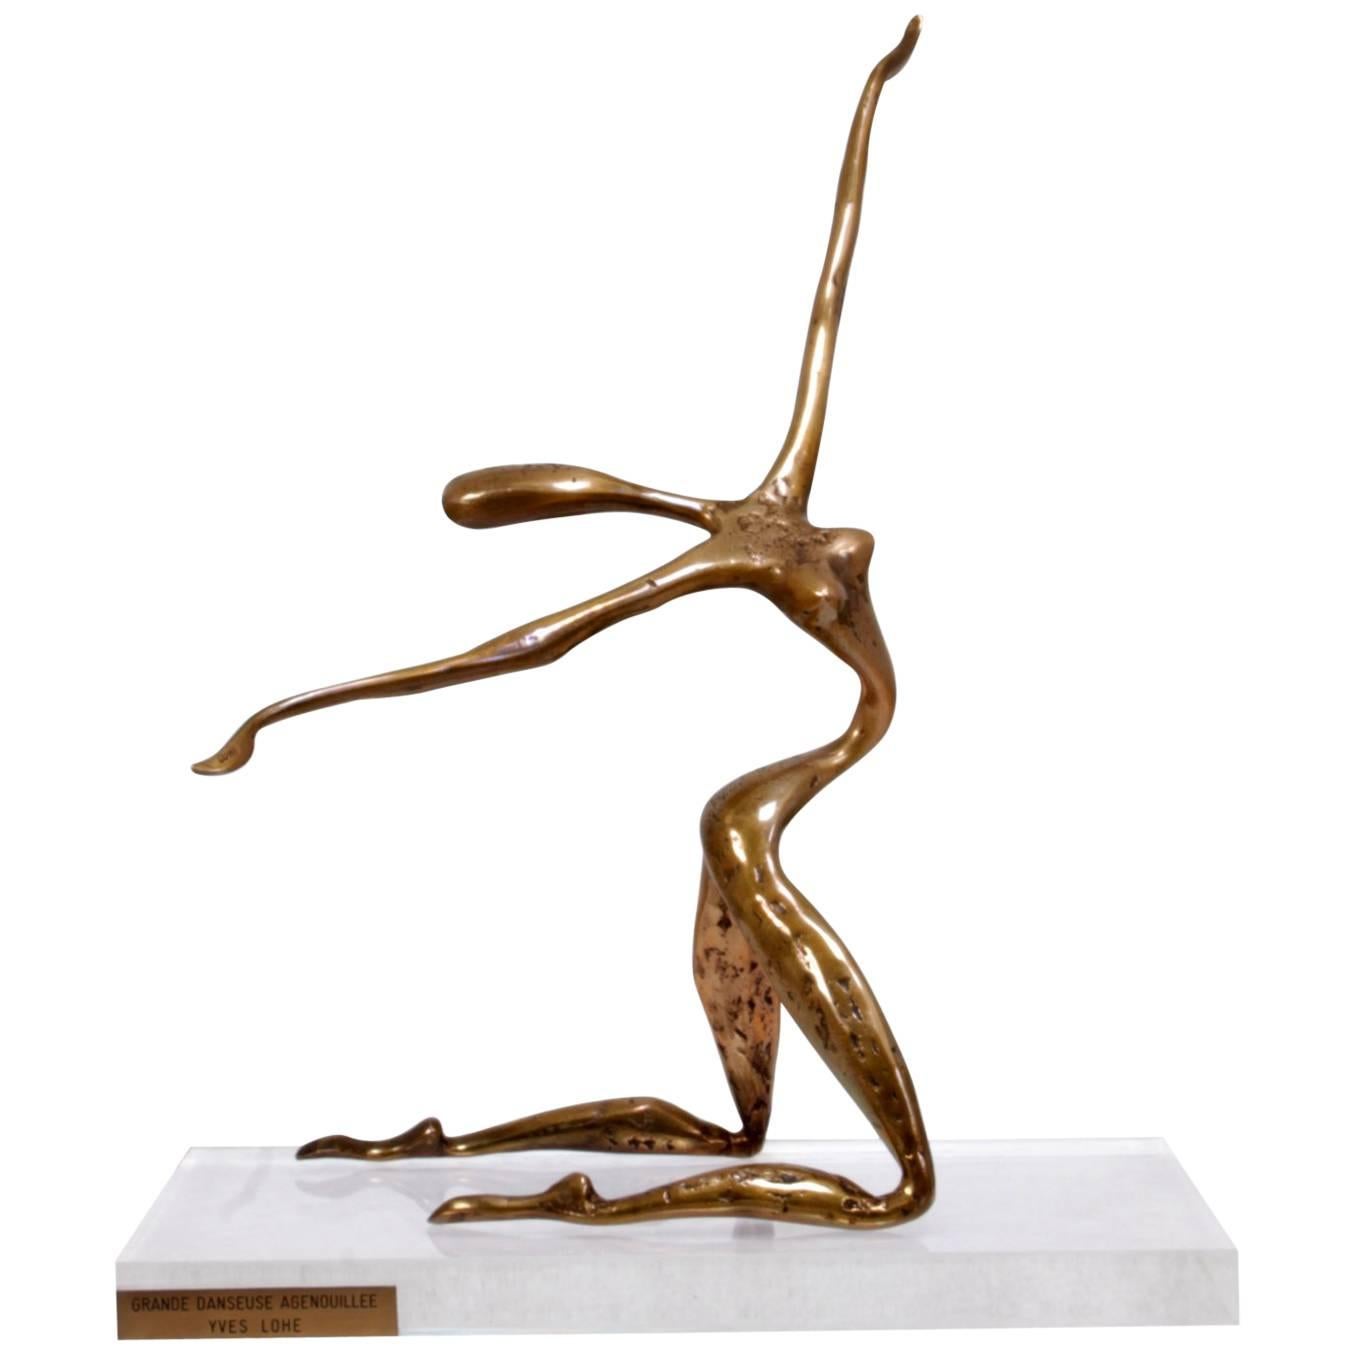 Bronze Sculpture by Yves Lohe, circa 1970 at 1stDibs